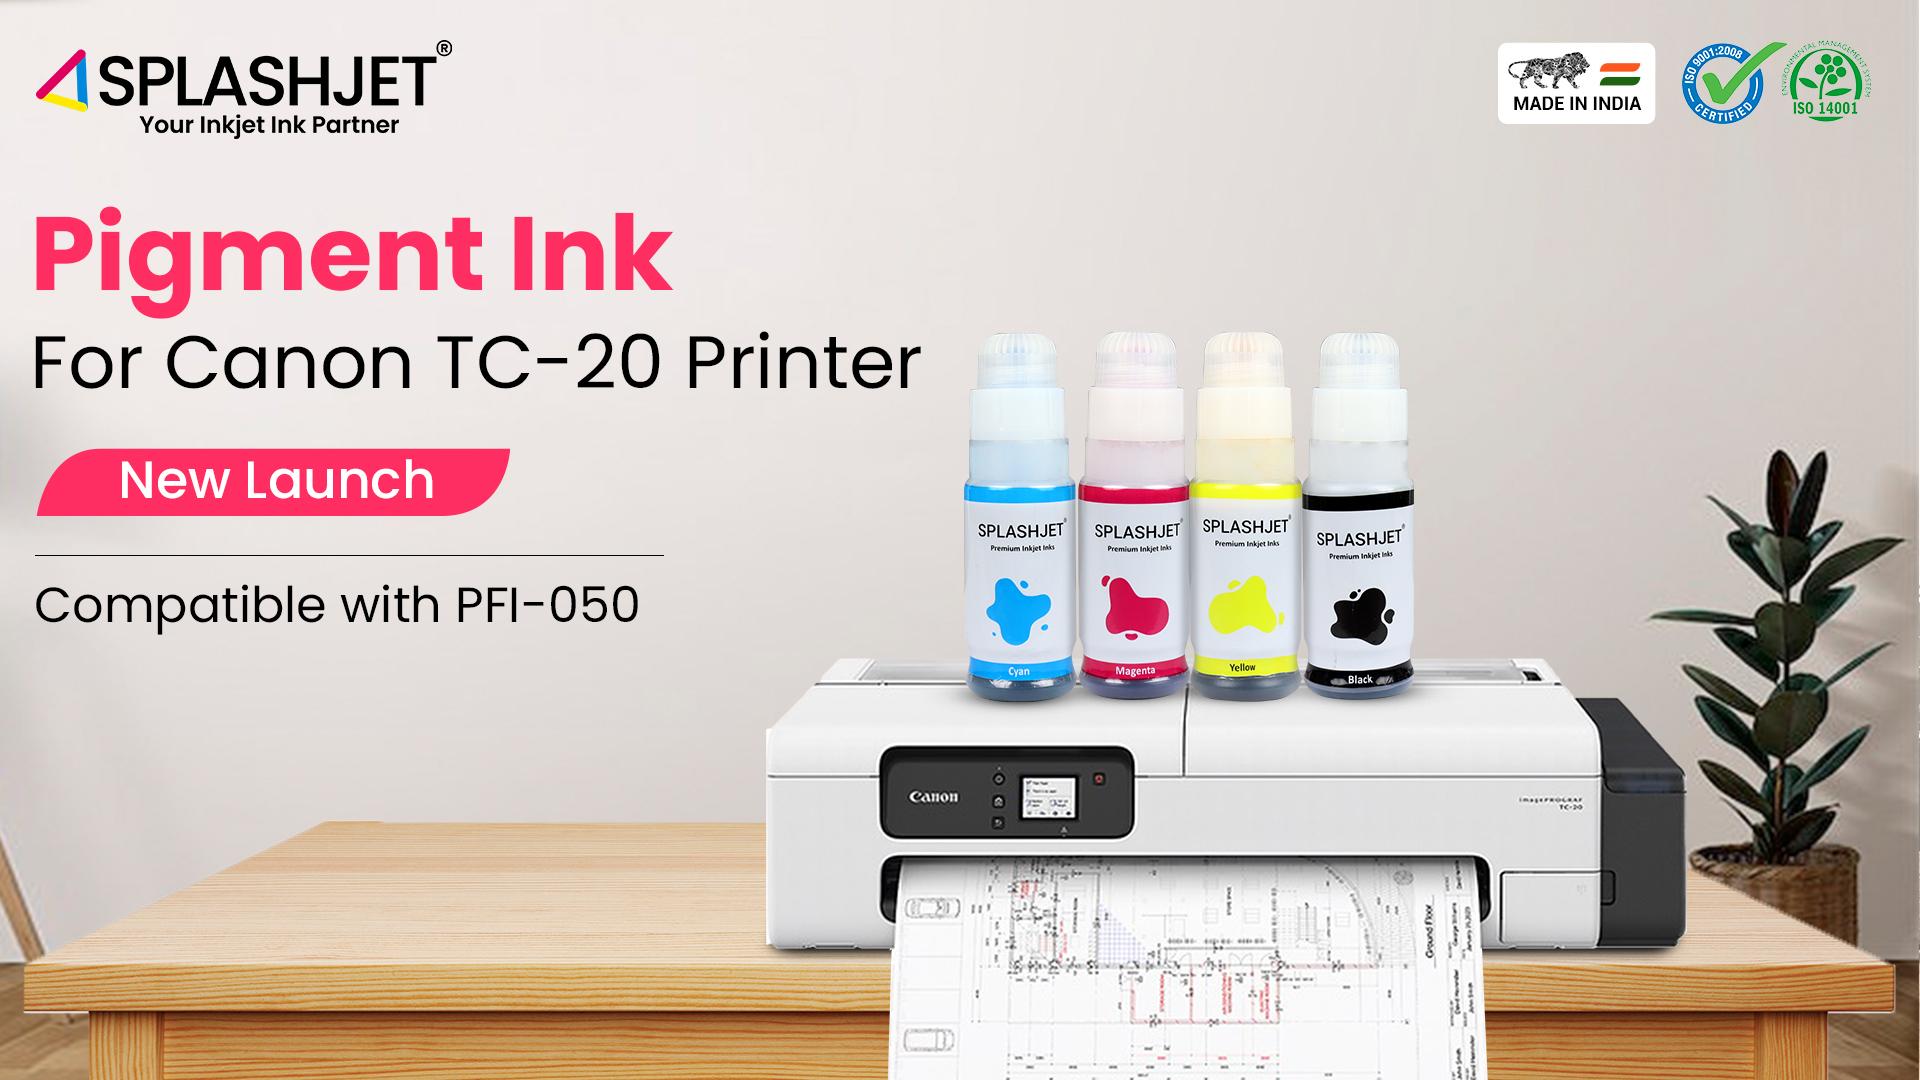 Introducing Compatible Pigment Ink For Canon TC-20 Printers